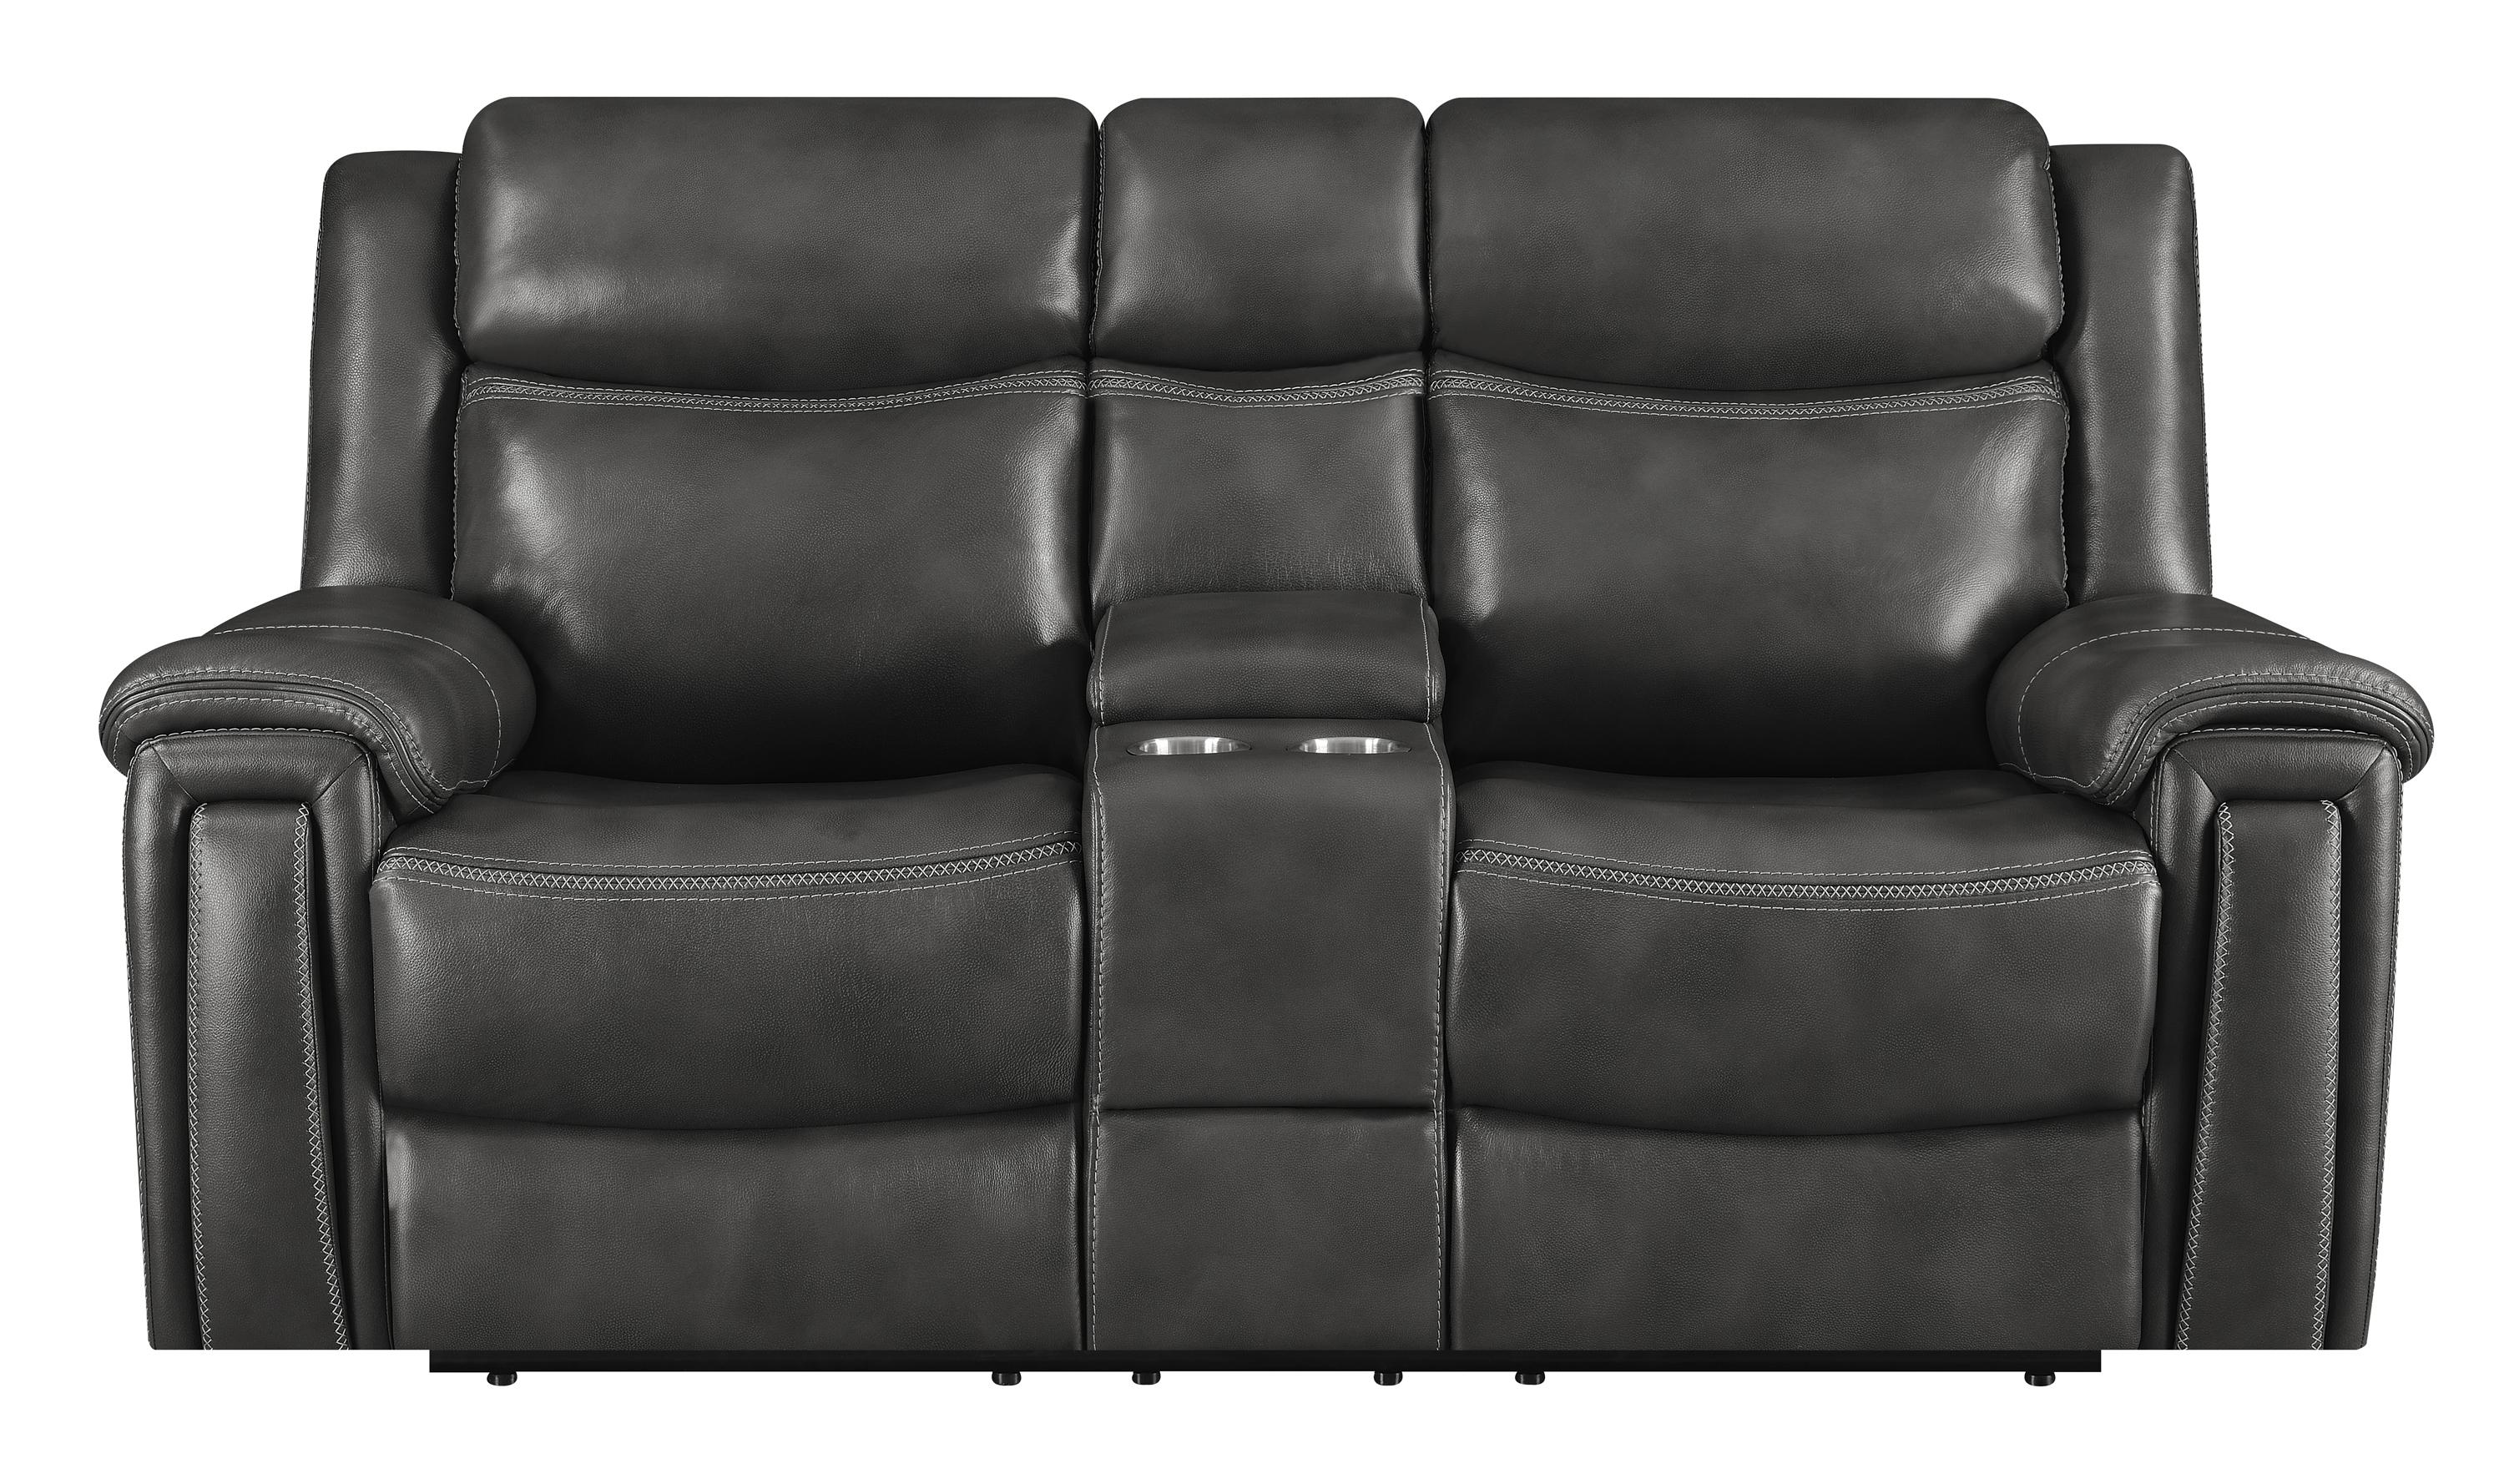 

    
609321PPI-S3 Transitional Hand Rubbed Charcoal Leather Power Sofa Set 3pcs Coaster 609321PPI-S3 Shallowford
